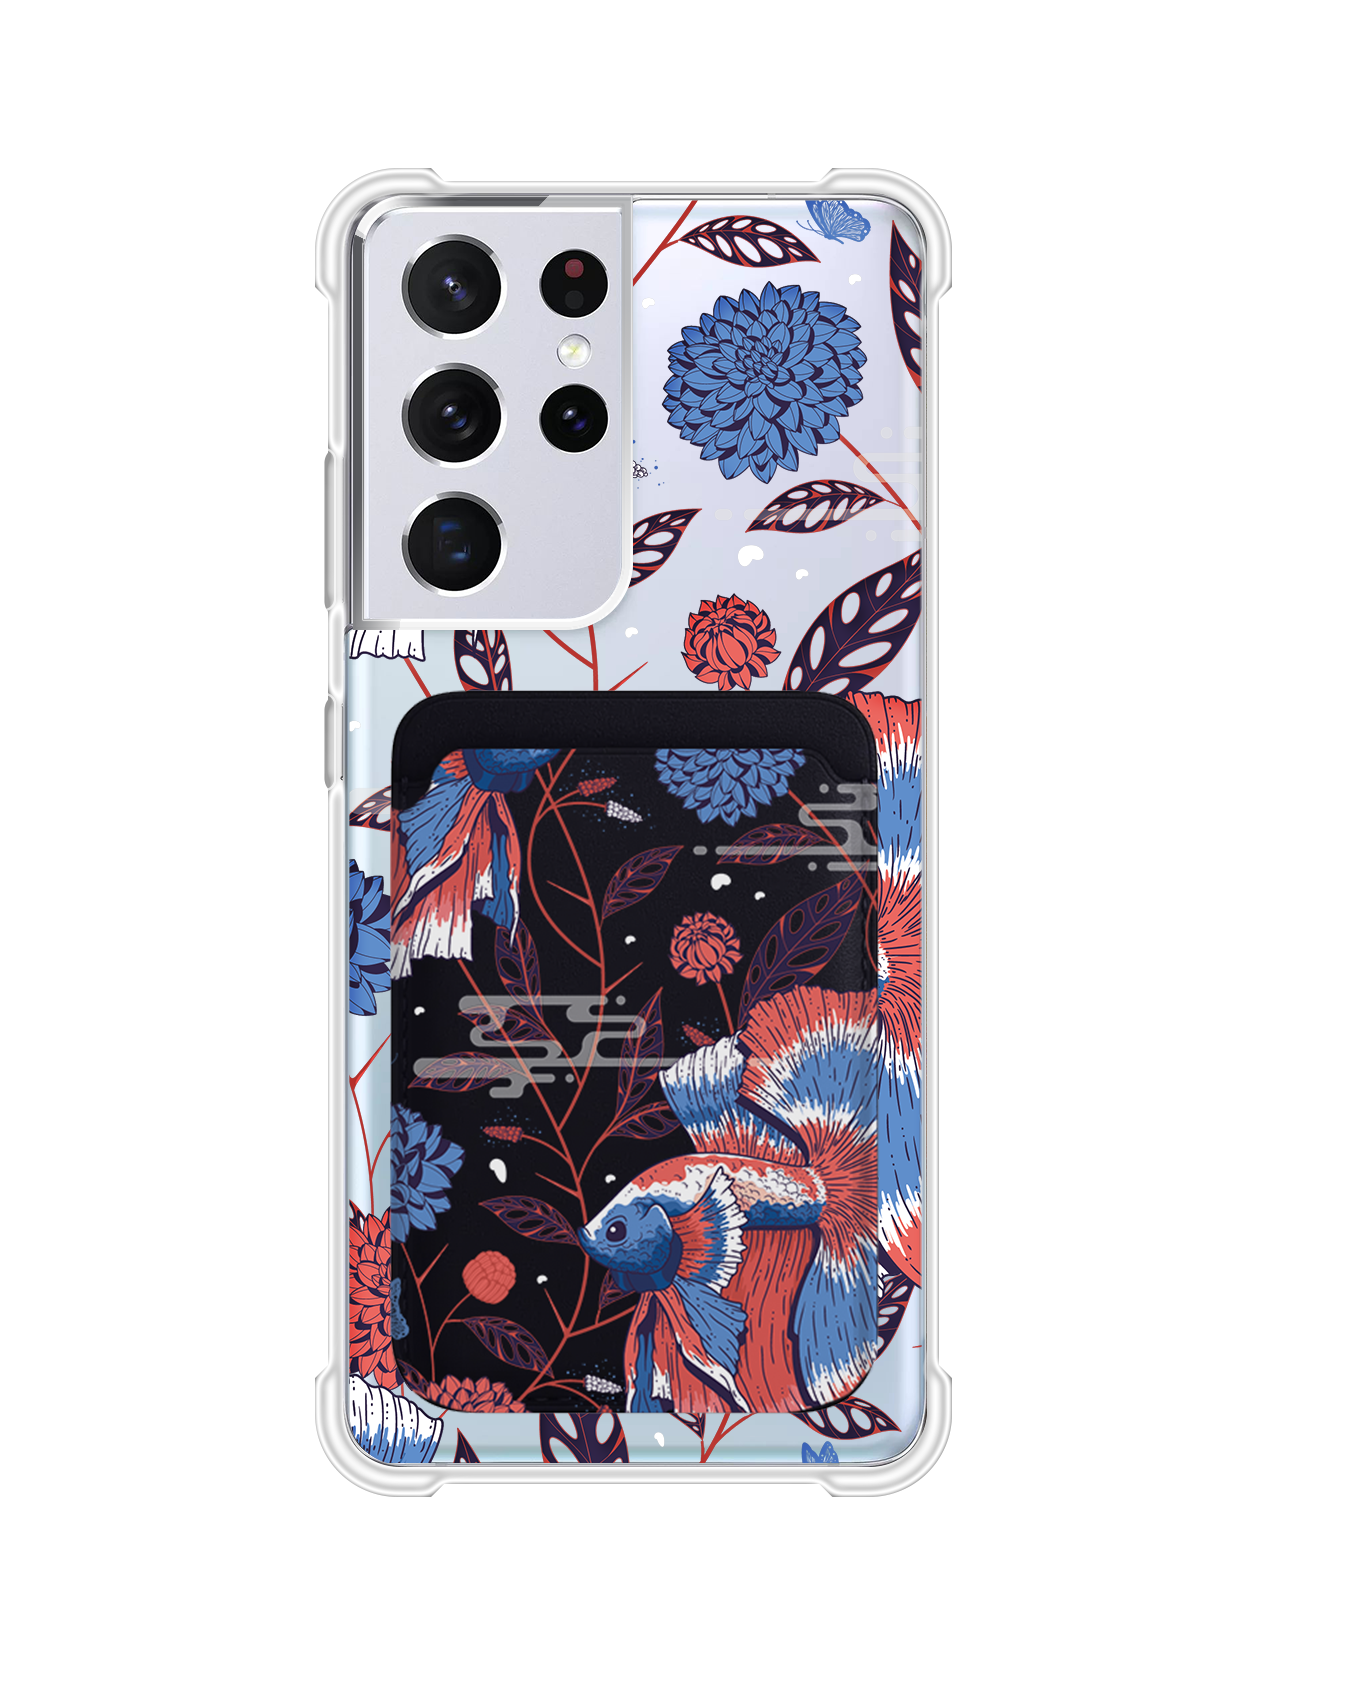 Android Magnetic Wallet Case - Fish & Floral 2.0